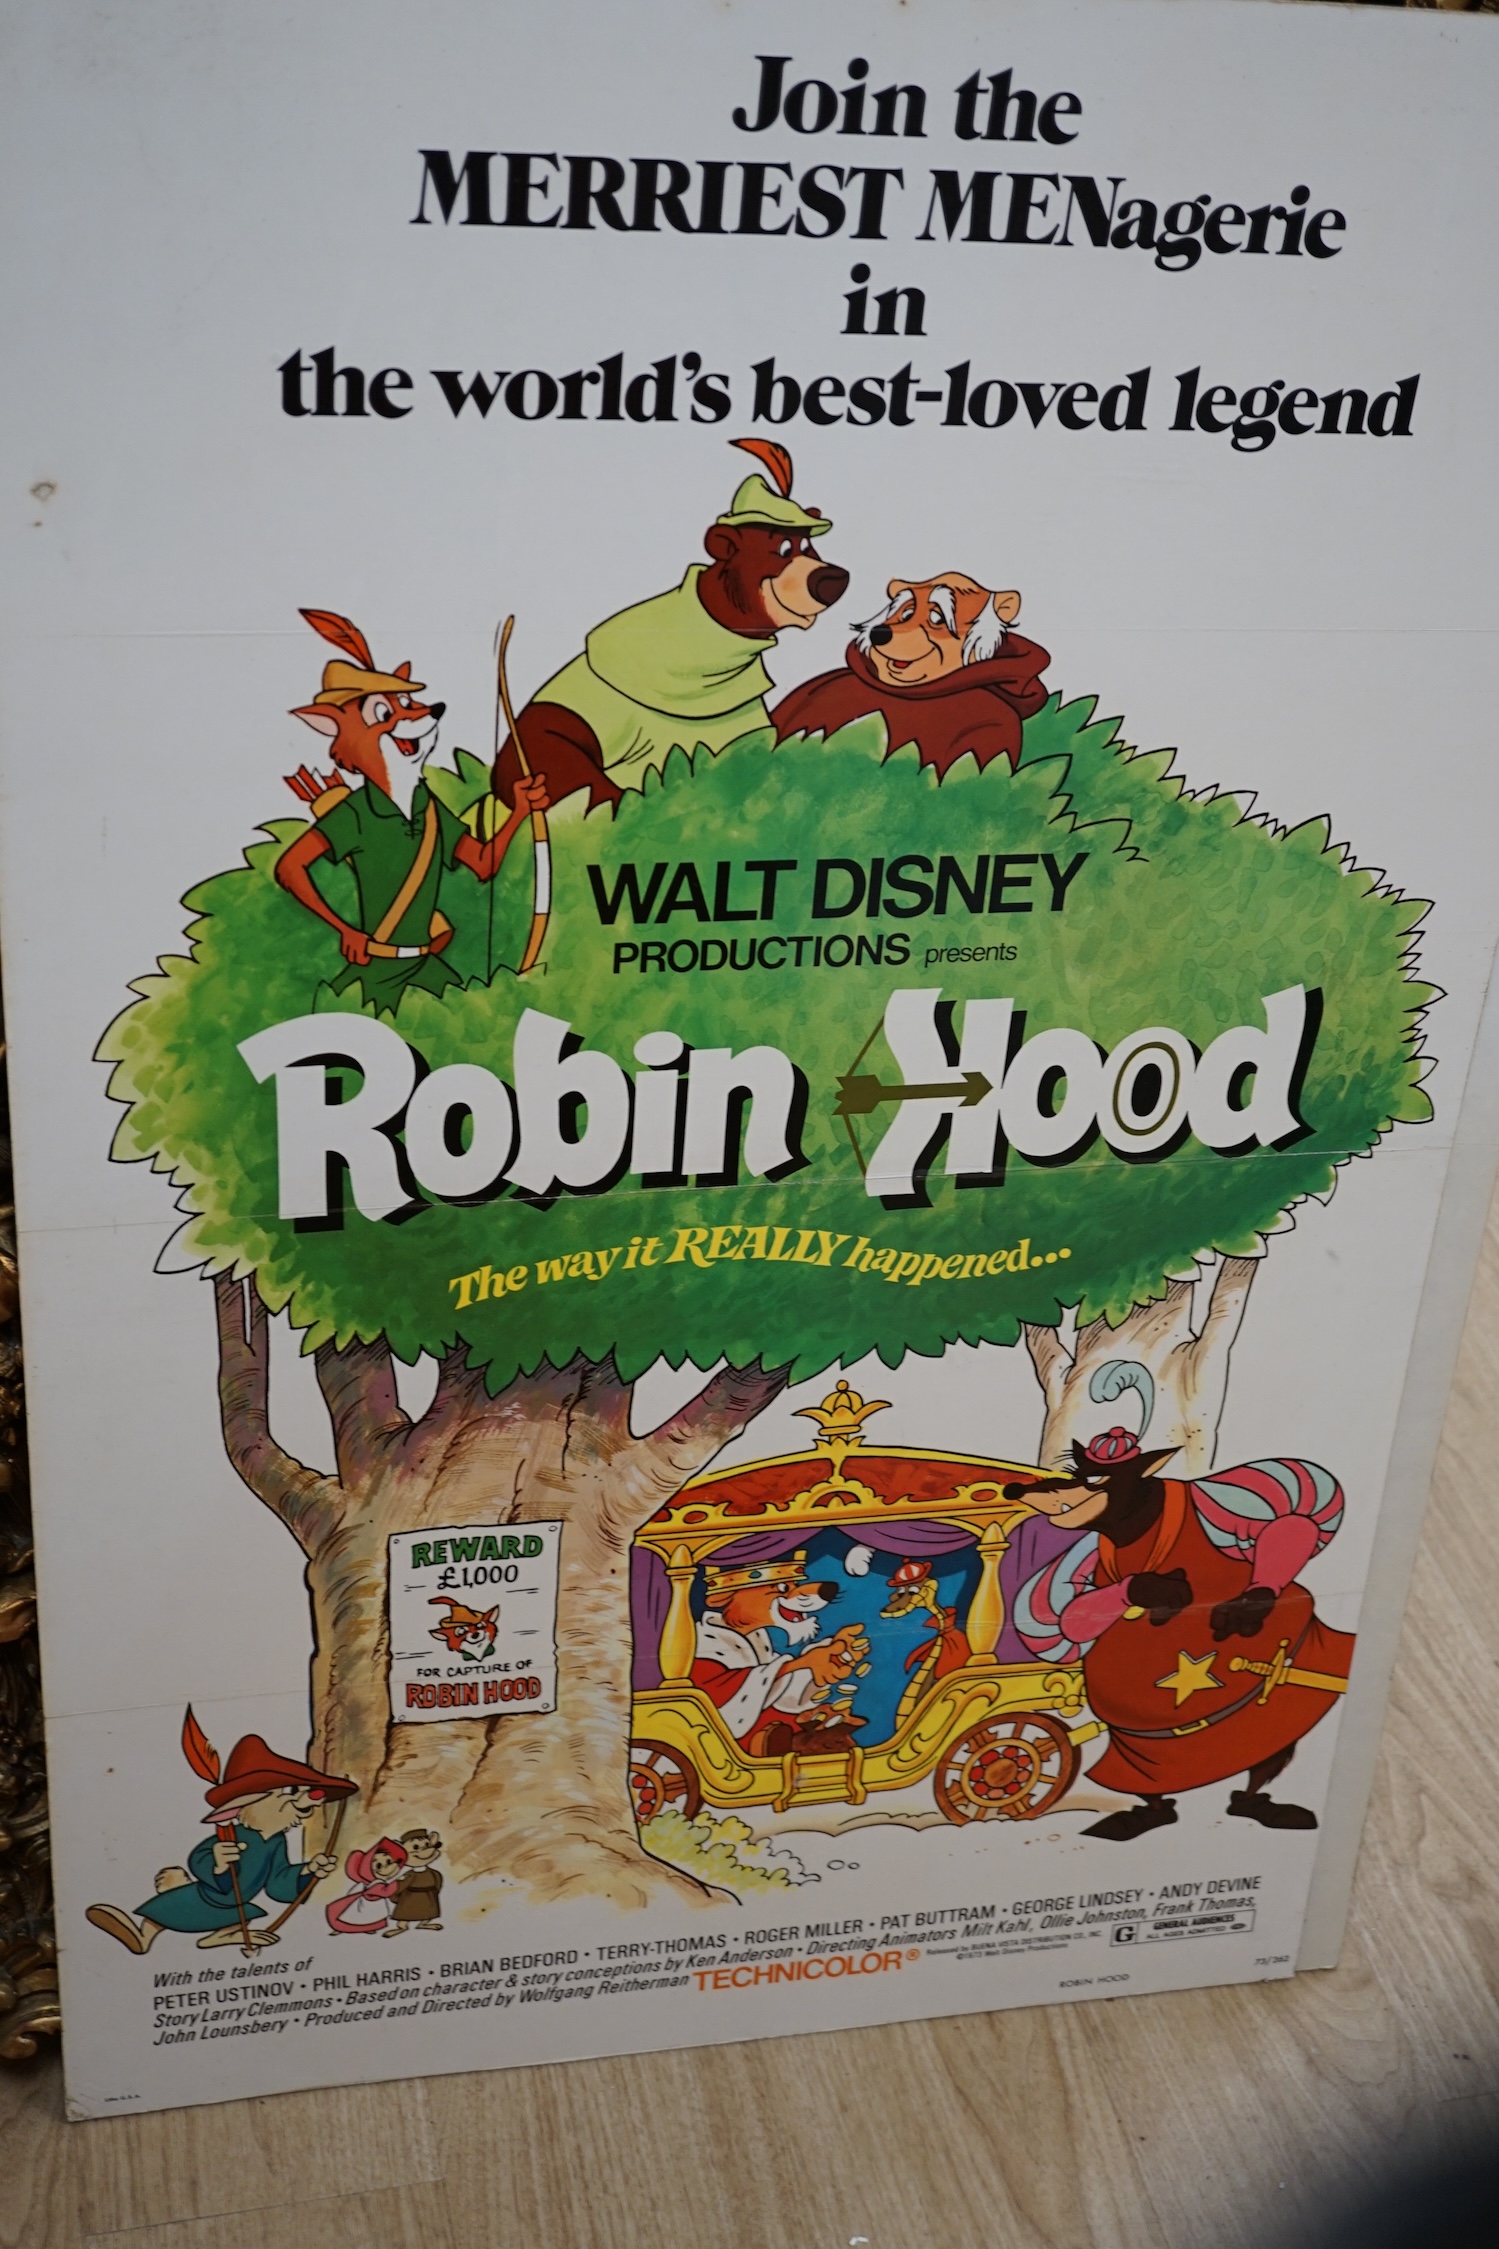 Five vintage Disney colour posters, including Alice in Wonderland, 1978, The Specimen and King Arthur 1979 and Robin Hood 1973, each approximately 74 x 98cm, unframed. Condition - fair, some discolouration and losses to